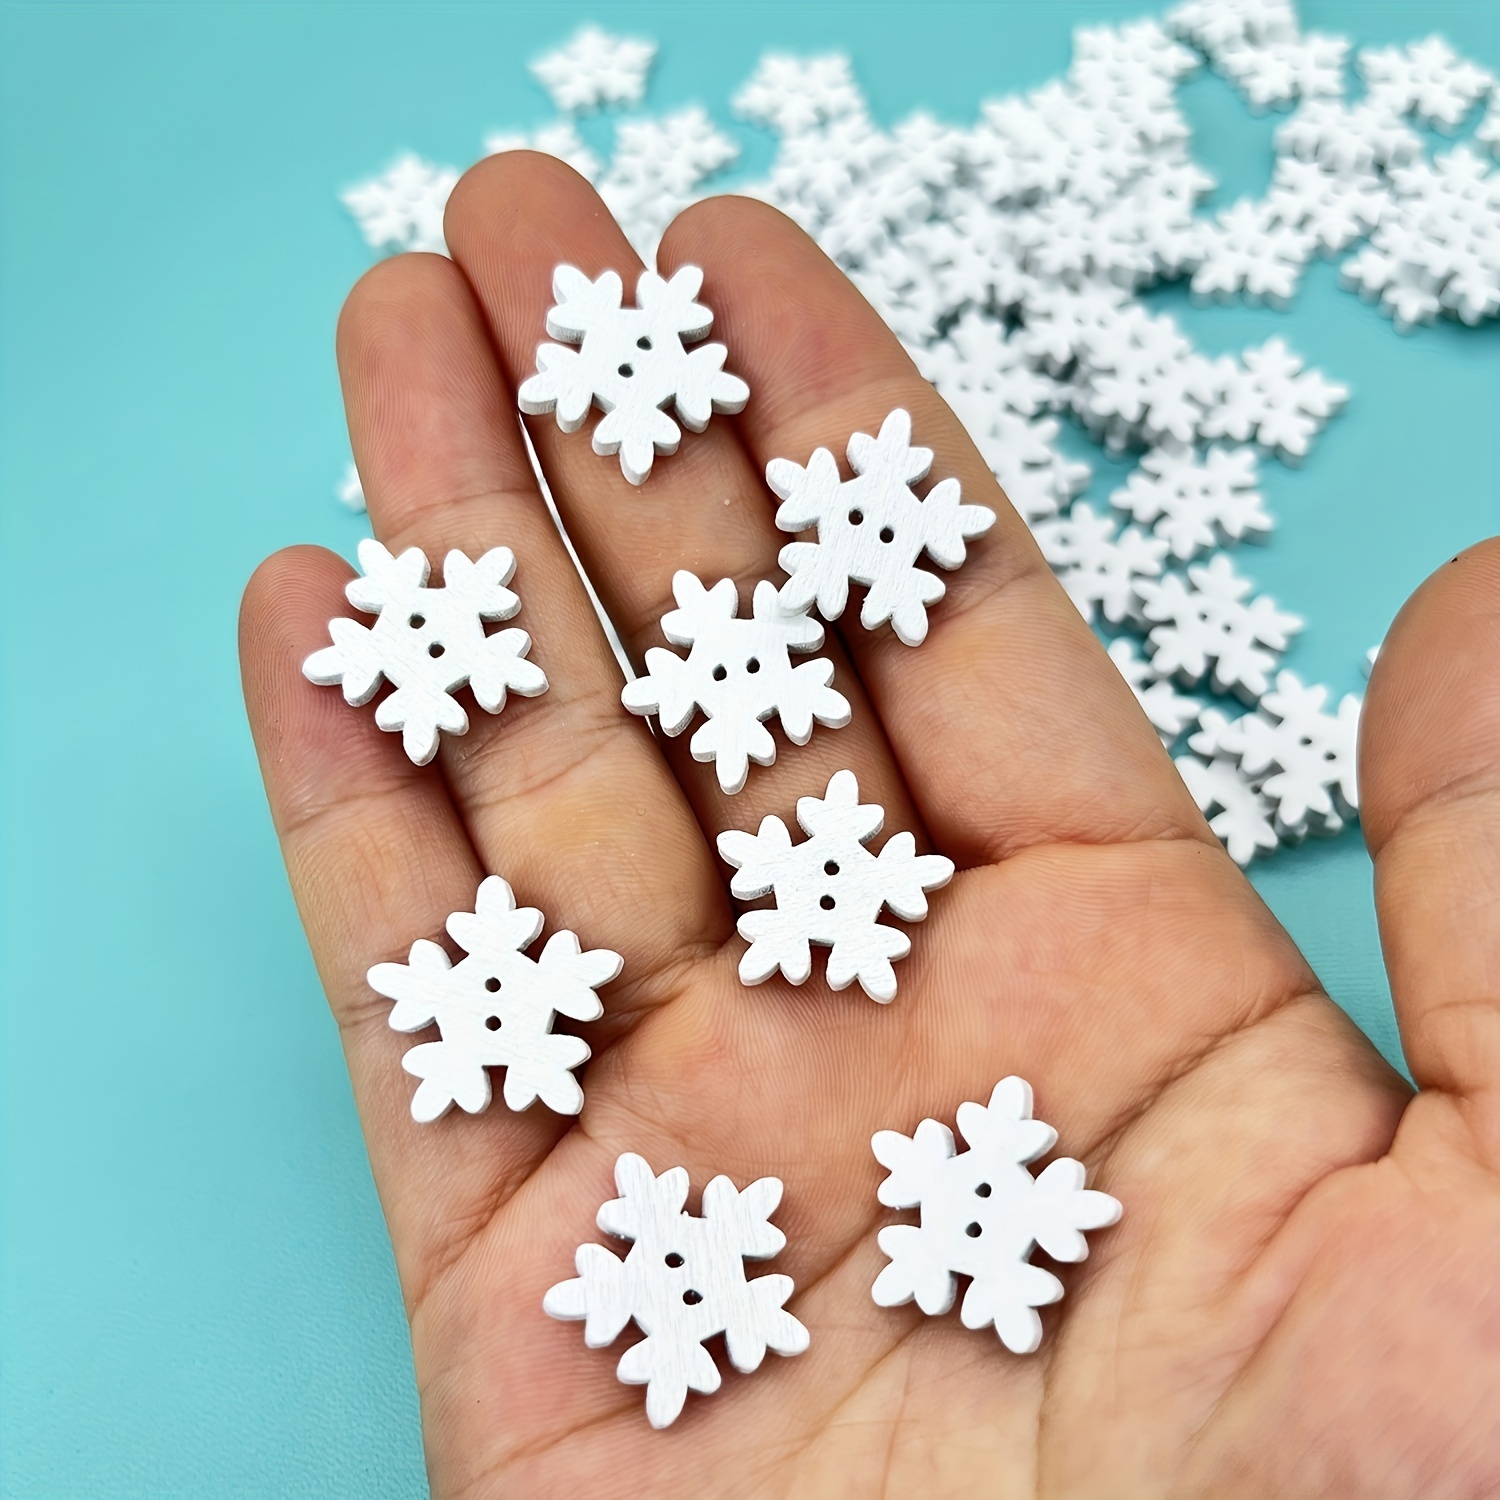 50pcs Tiny Resin Snowflakes Decor, Small Christmas Snowflake Decorations  Mini Snow Shaped Craft for DIY Crafts Winter Parties Home Decoration  (White